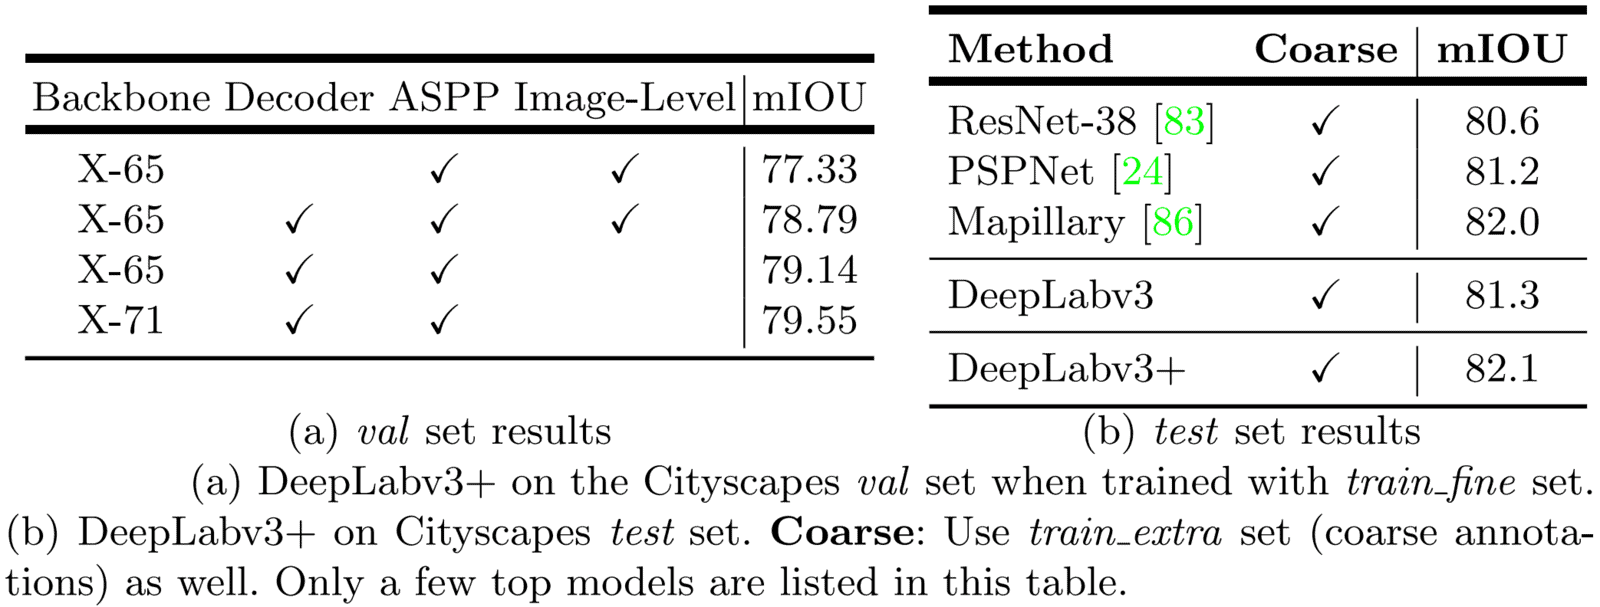 DeepLabv3+ results on the cityscapes dataset.